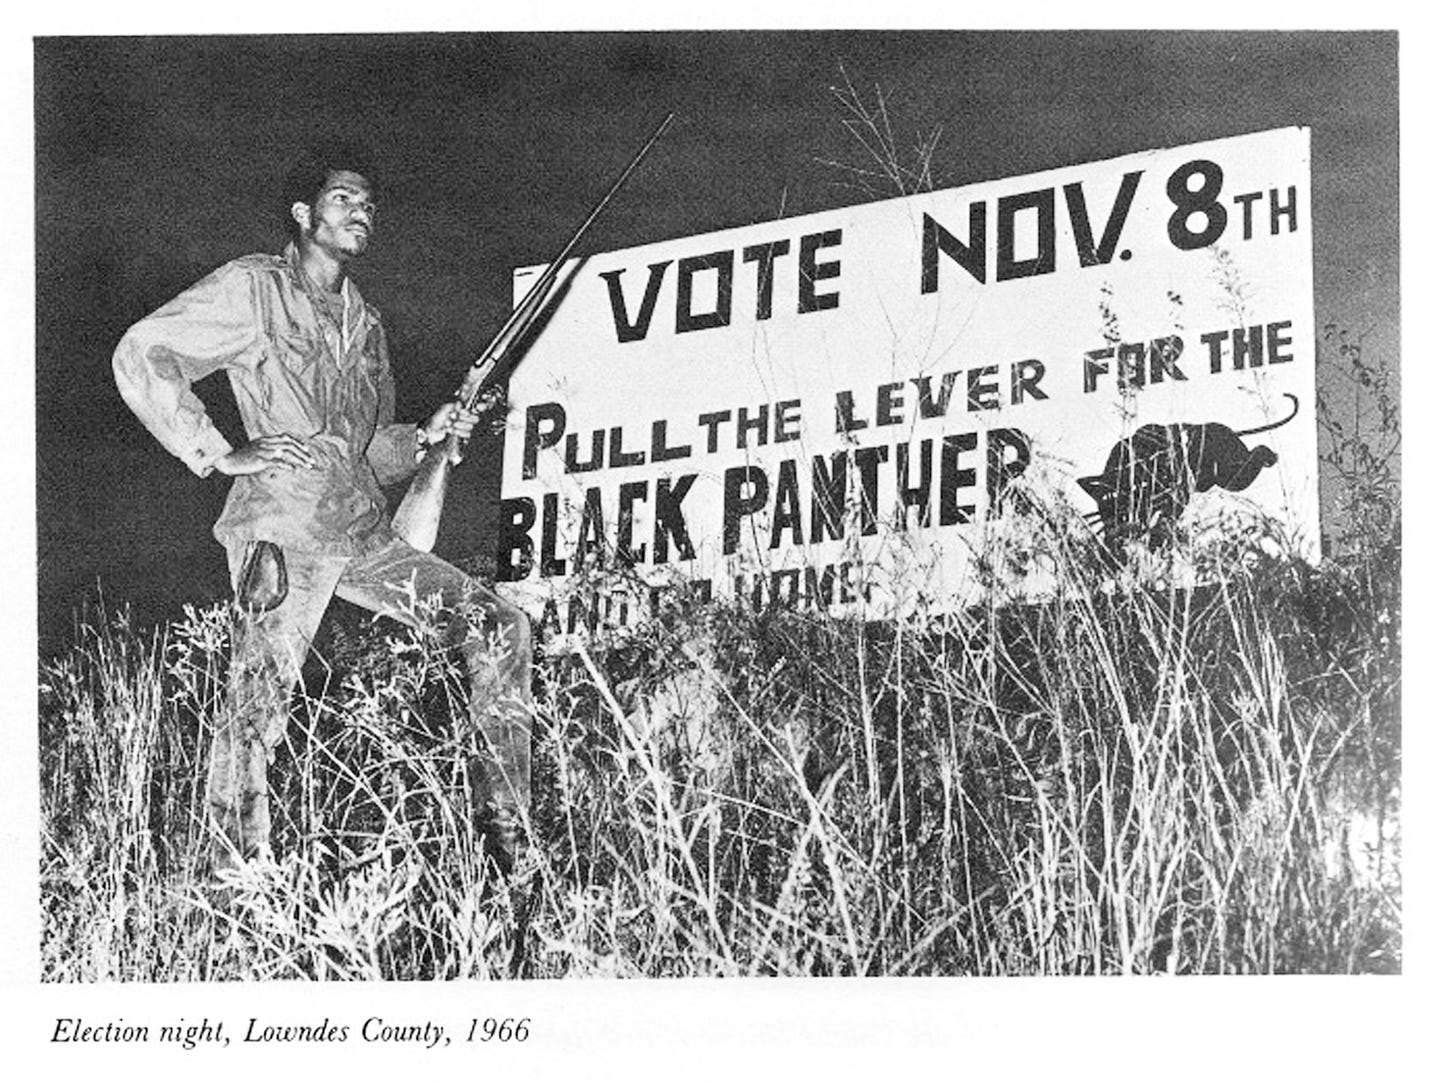 Film still from LOWNDES COUNTY AND THE ROAD TO BLACK POWER featuring a photo from 1966 with a Black man holding a rifle in front of a "Vote Black Panther" sign.